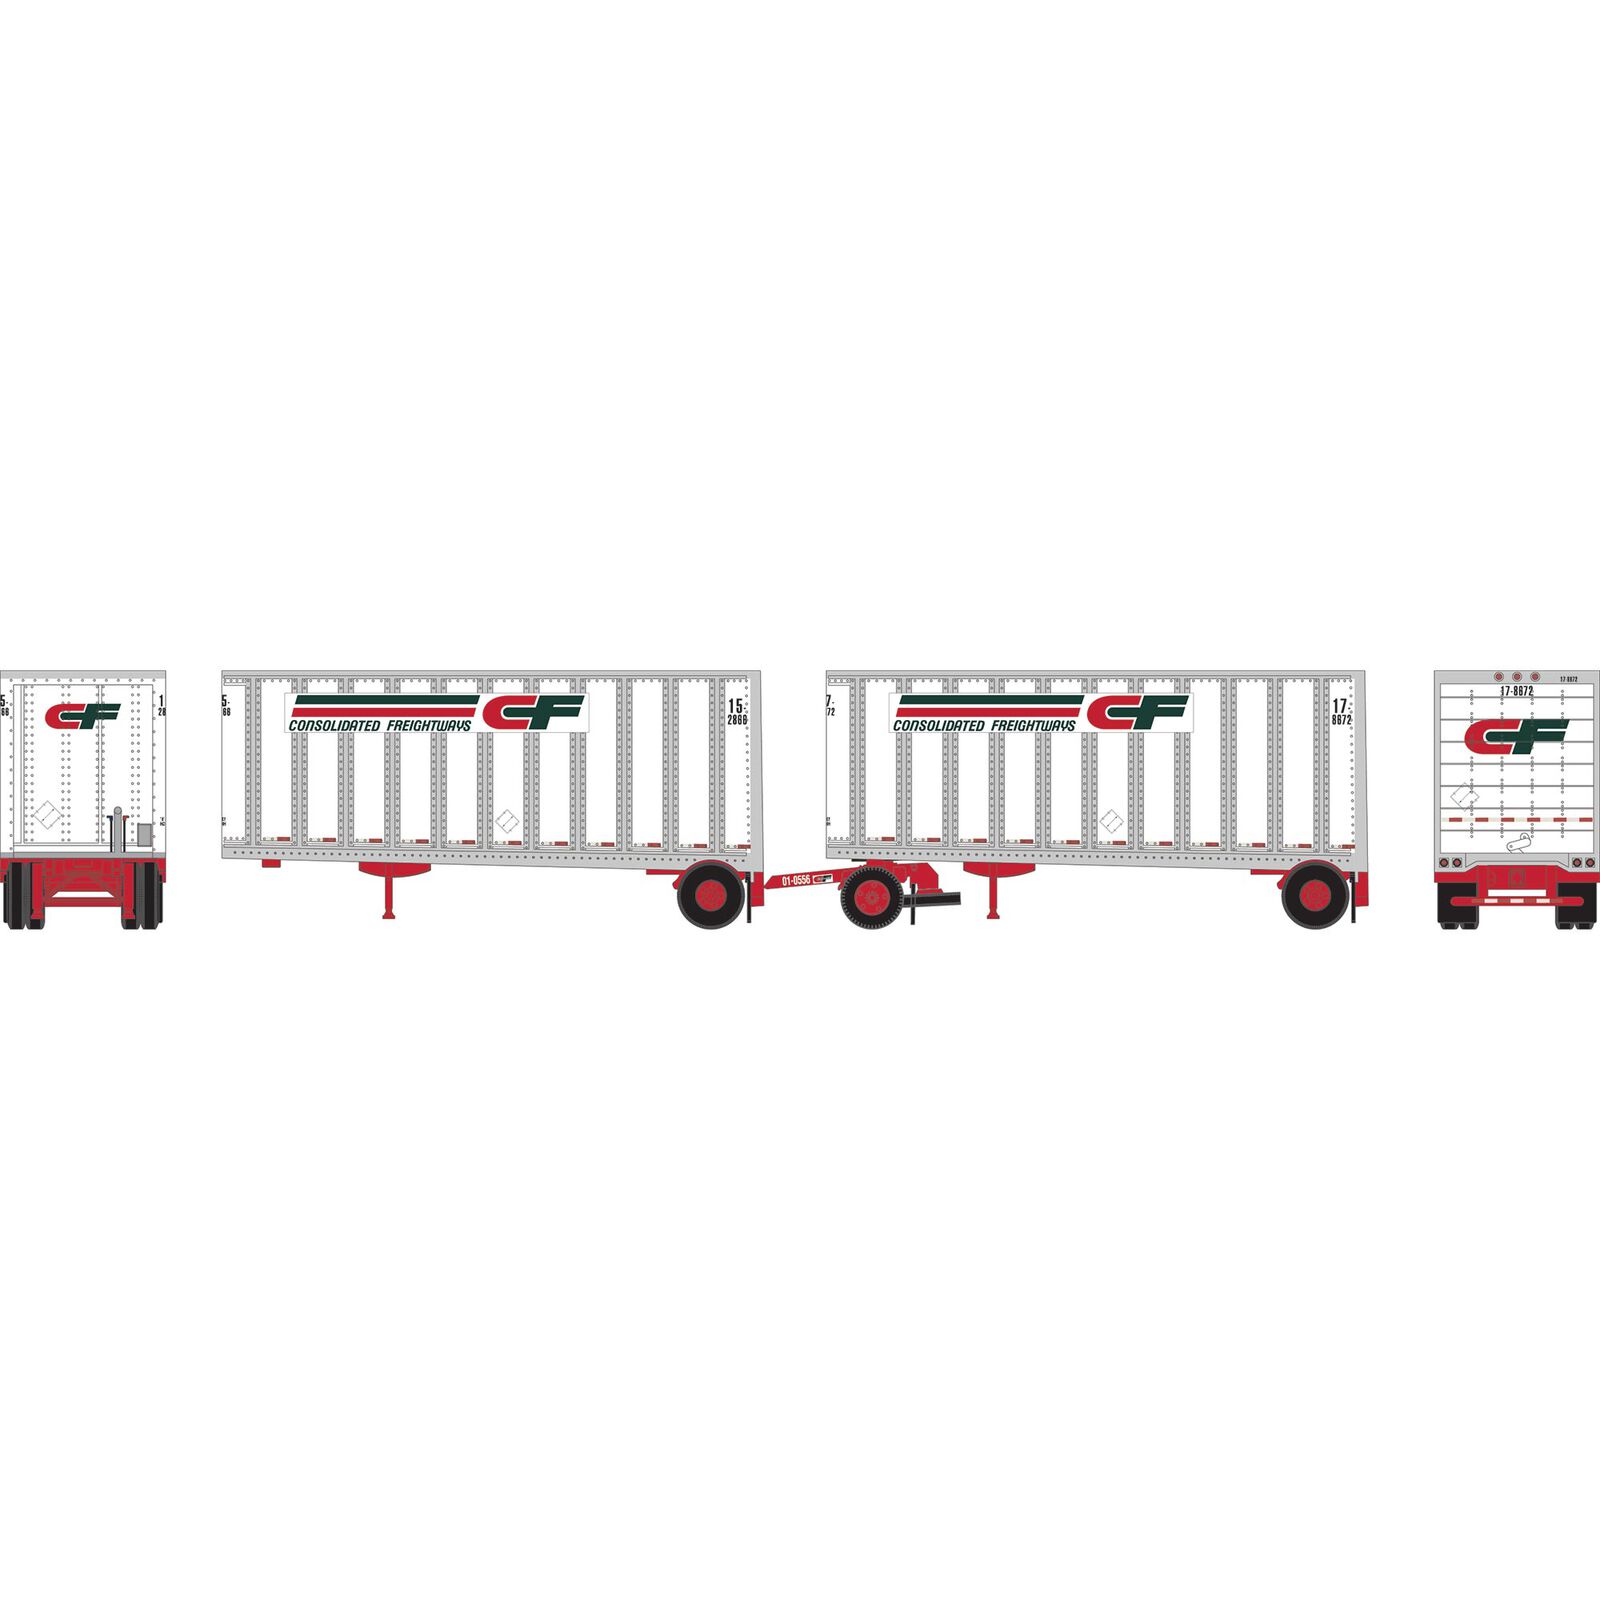 N ATH 28' Wedge Trailers Ext. Post (2) with Dolly, Consolidated Freight- Trailers: 15-2866/17-8672; Dolly: 01-0556